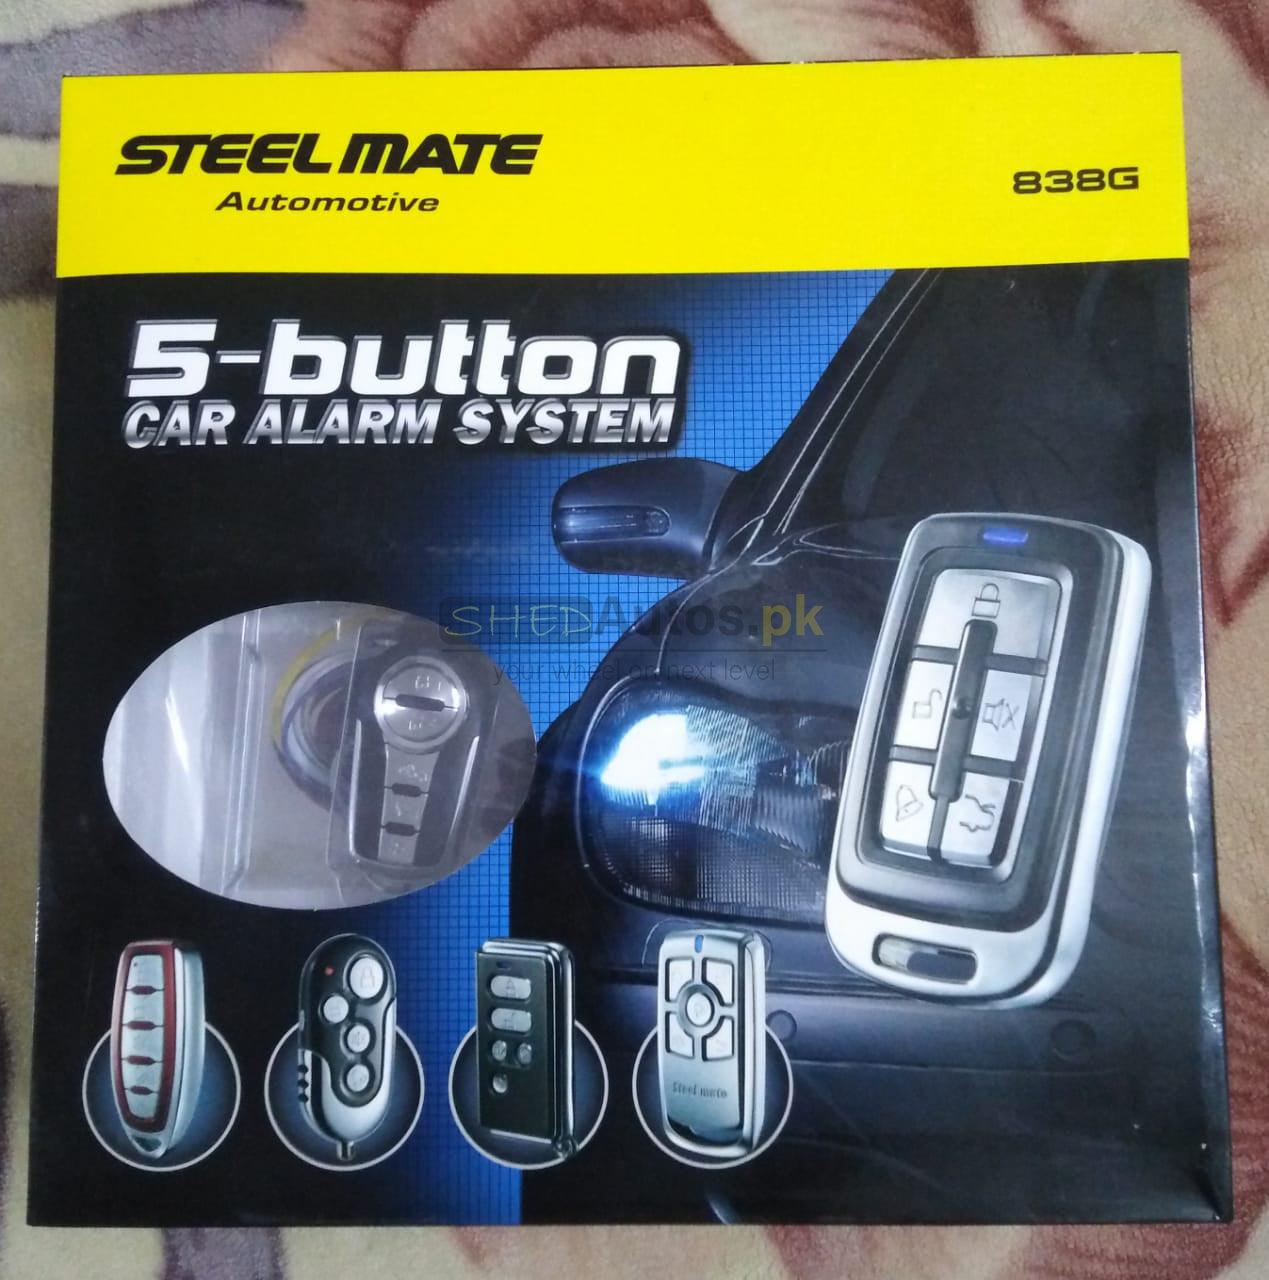 SteelMate 5 Button Car Alarm System For All cars (838G Model) - ShedAutos.PK